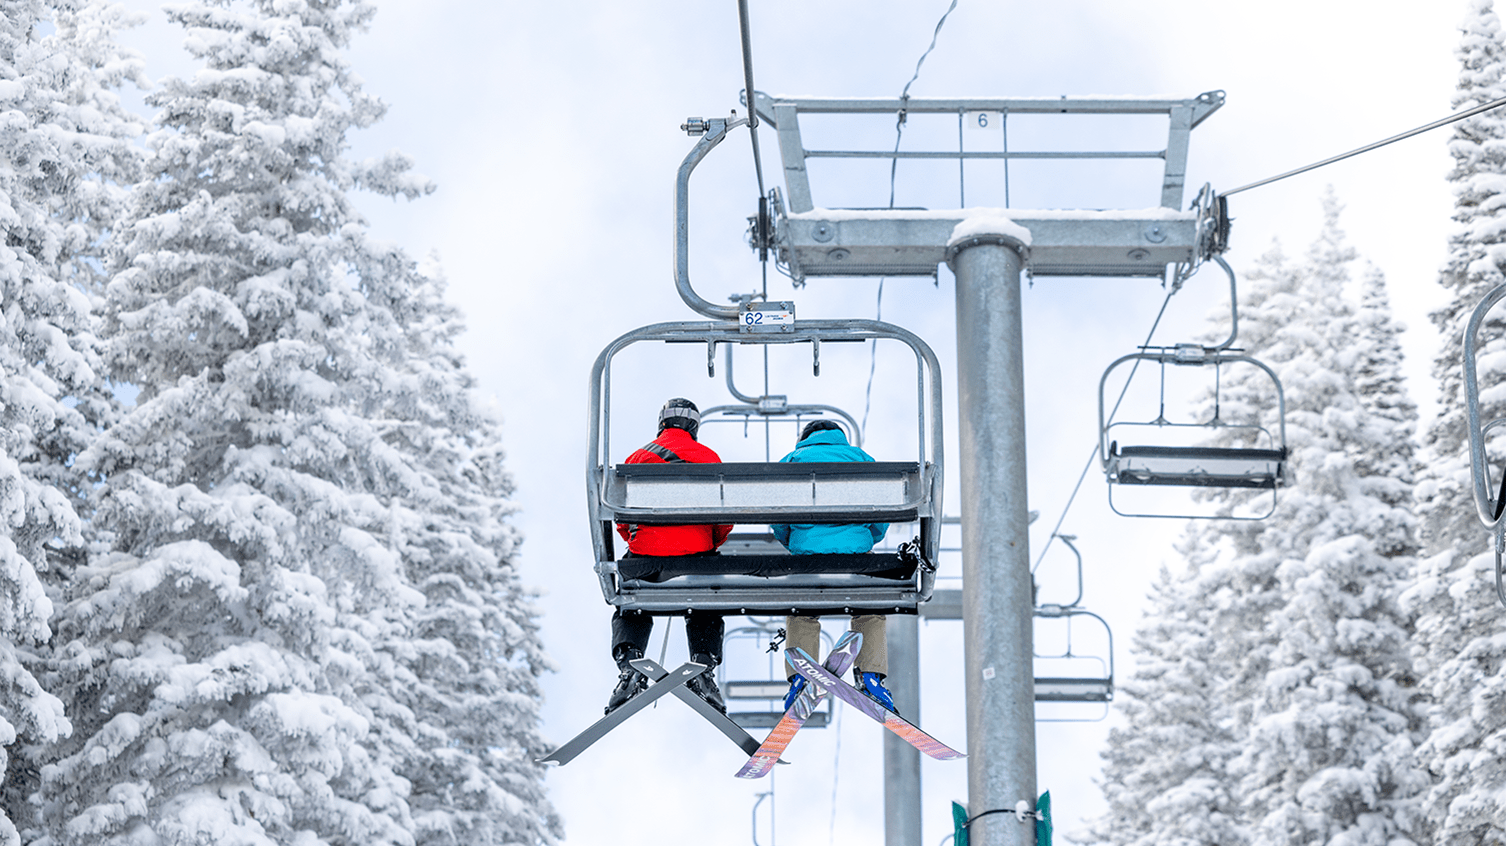 Two skiers sit on a chair lift, one in a blue coat, one in a red, Aspen Snowmass Pro coat. It is a bluebird day and the trees are coated in fresh snow